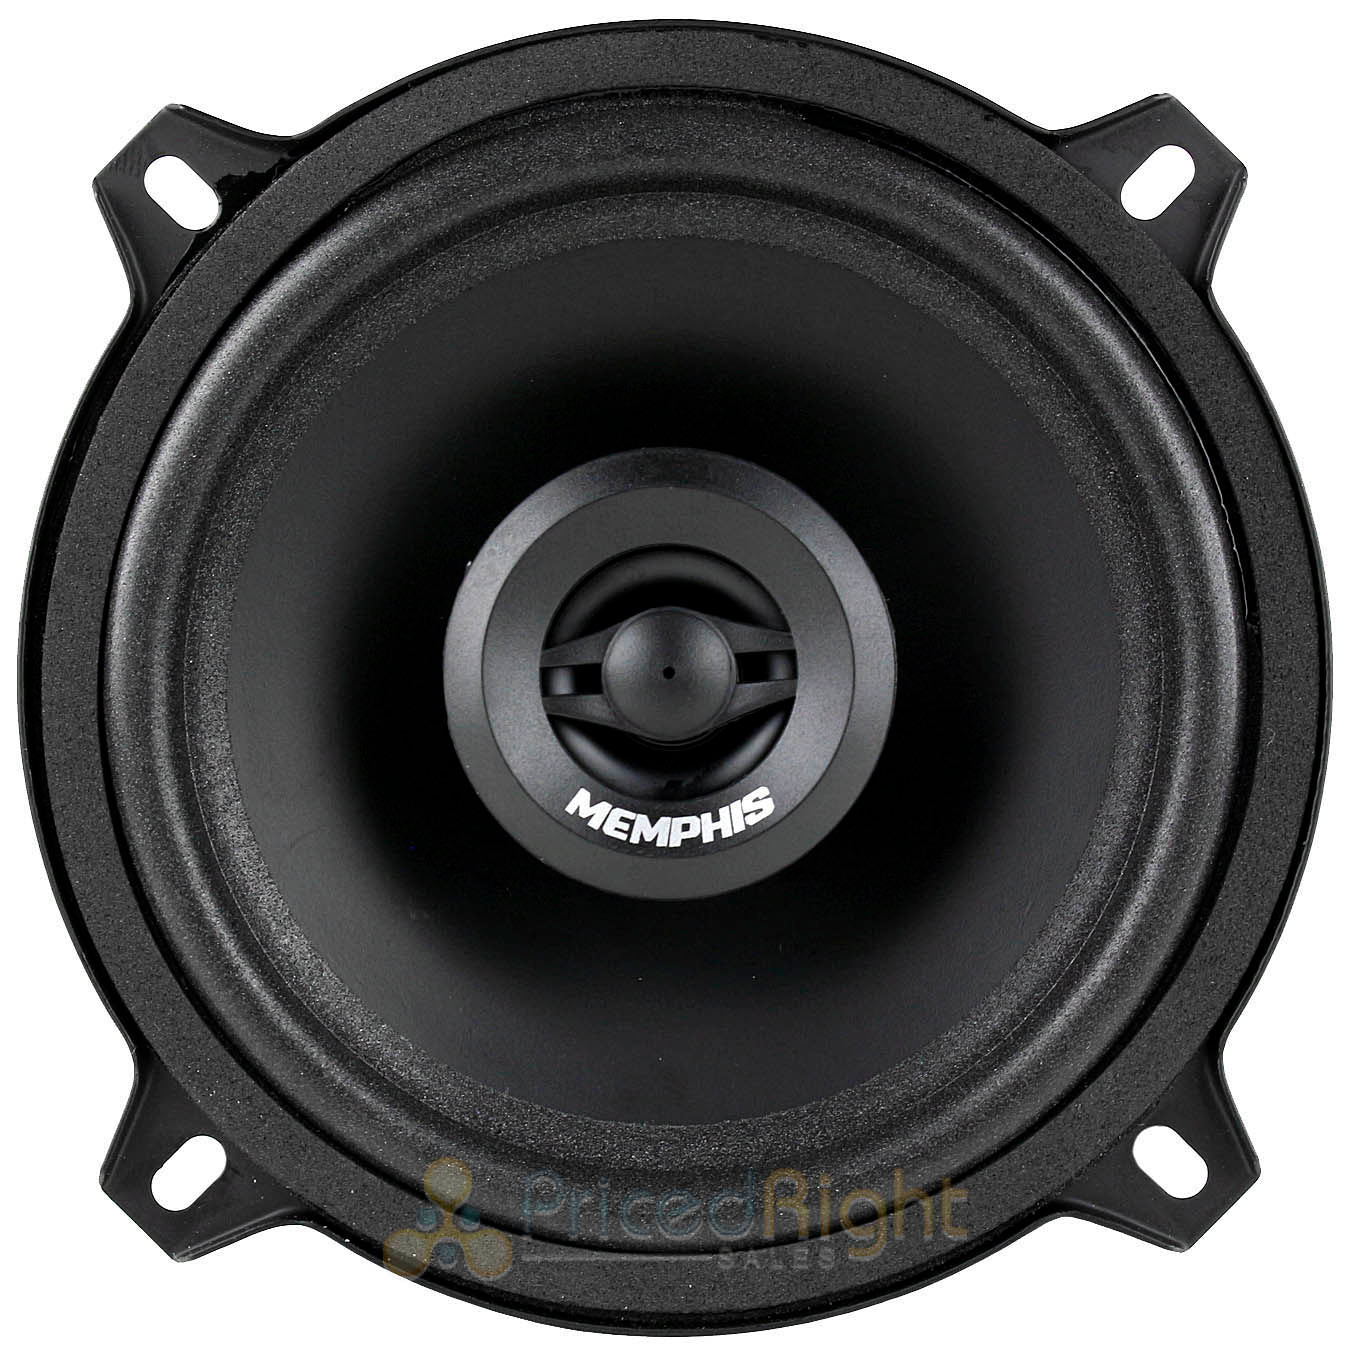 4 Memphis Audio 5.25" 2 Way Coaxial Speakers 50 Watts Max Street Reference SRX52